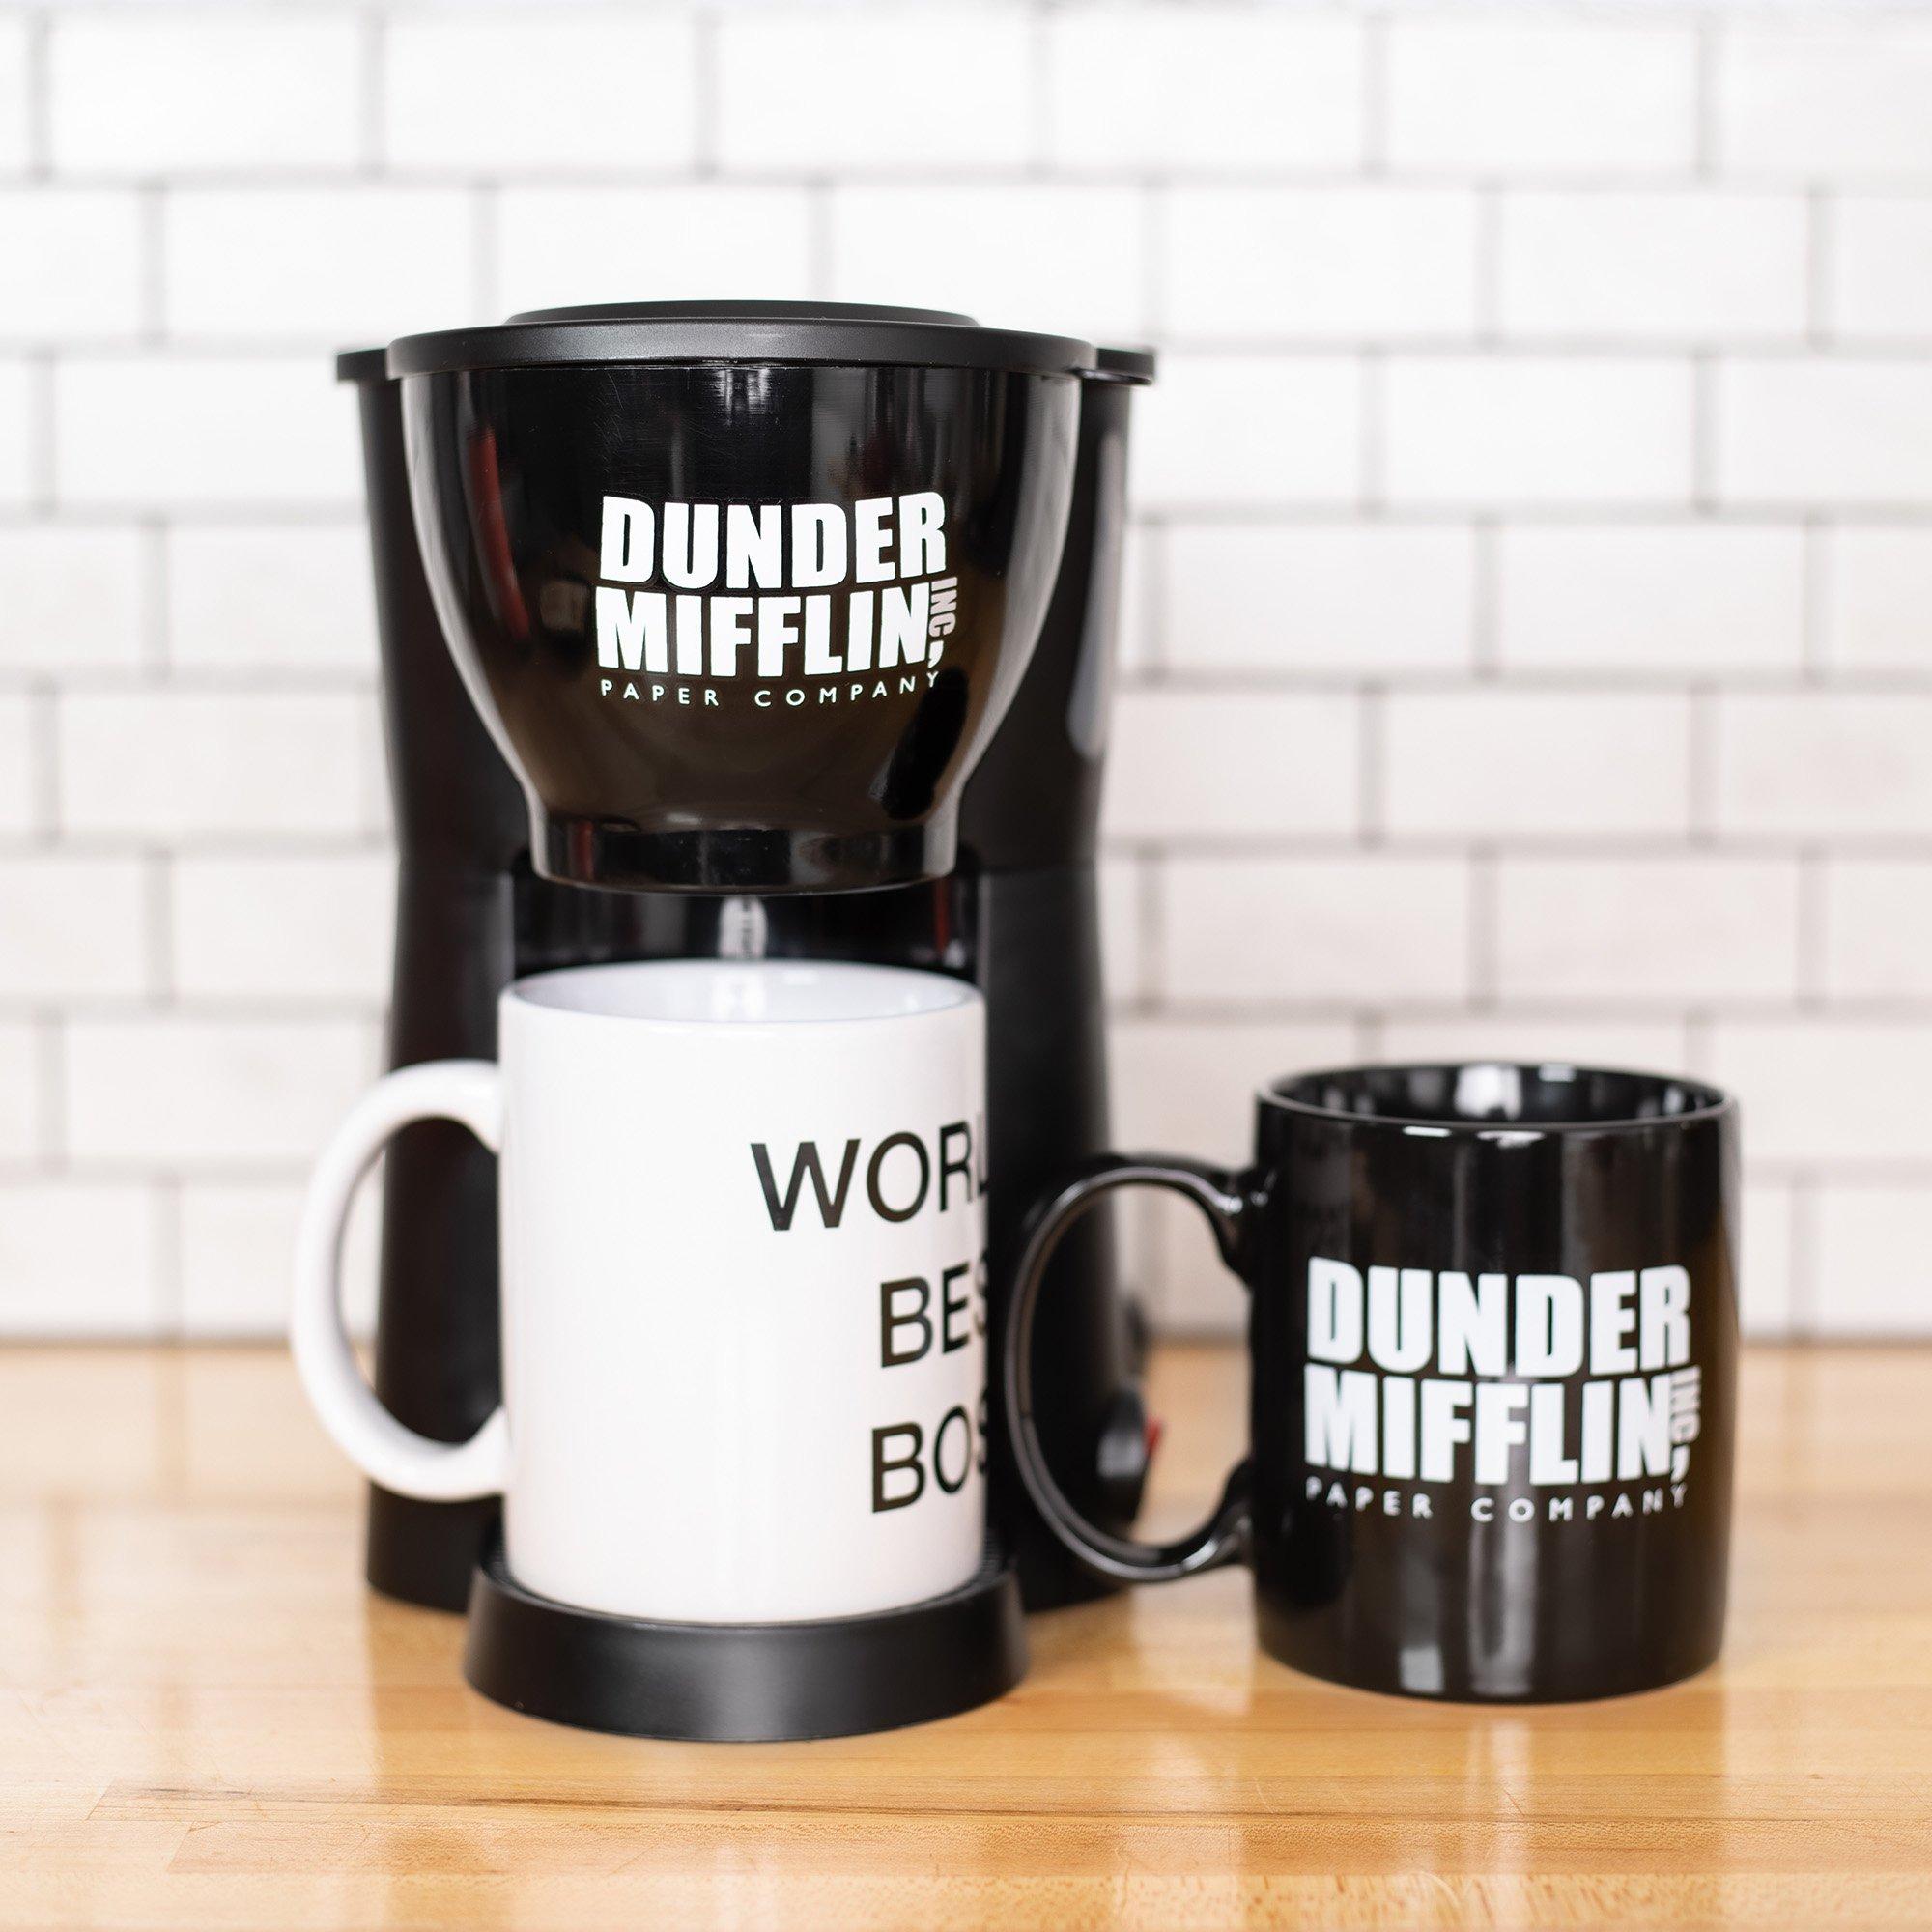 https://media.gamestop.com/i/gamestop/20005582_ALT06/The-Office-Single-Cup-Coffee-Maker-Gift-Set-with-2-Mugs?$pdp$